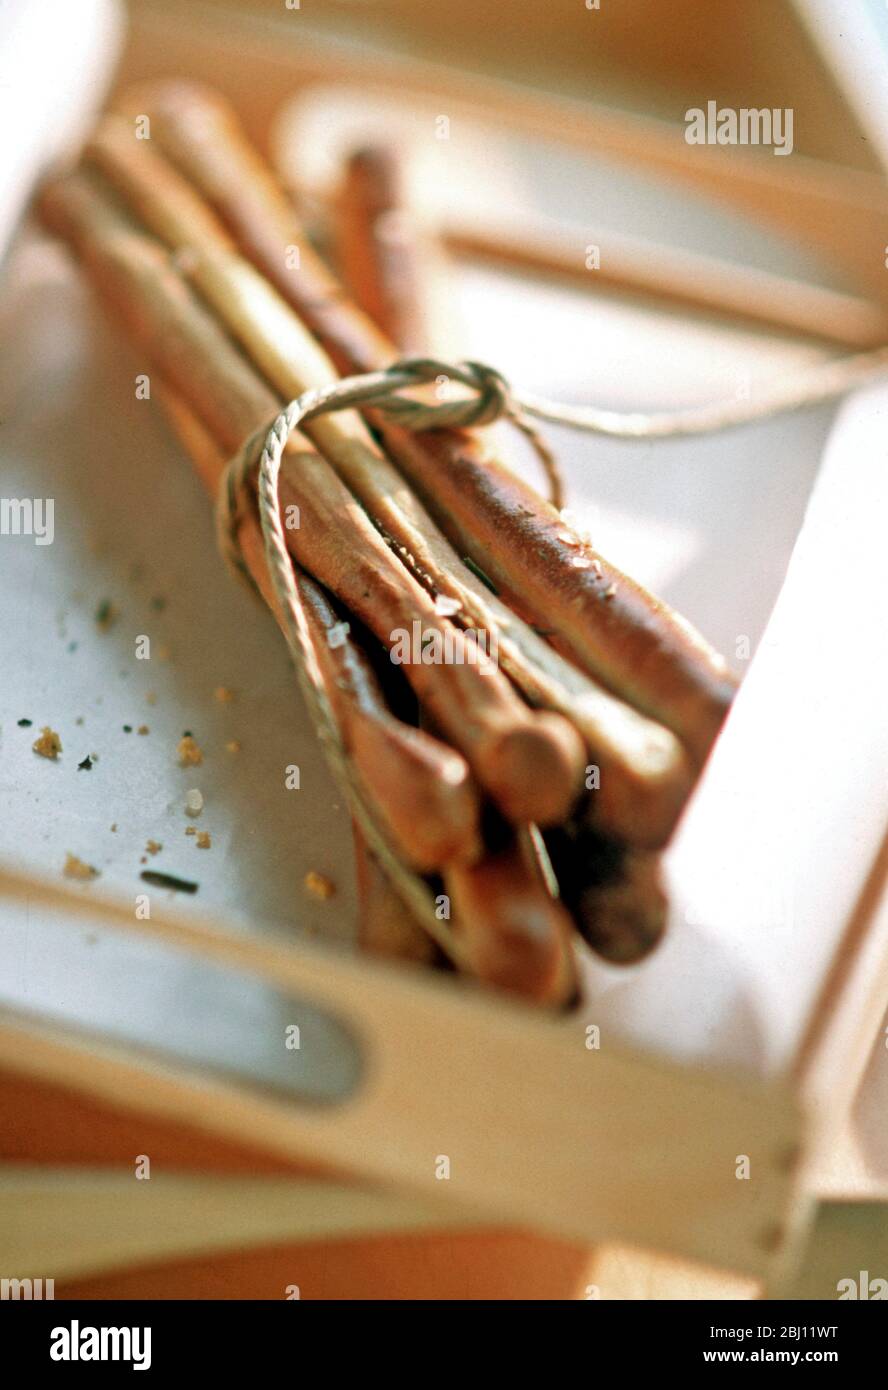 Bundle of home made breadsticks on wooden tray - Stock Photo